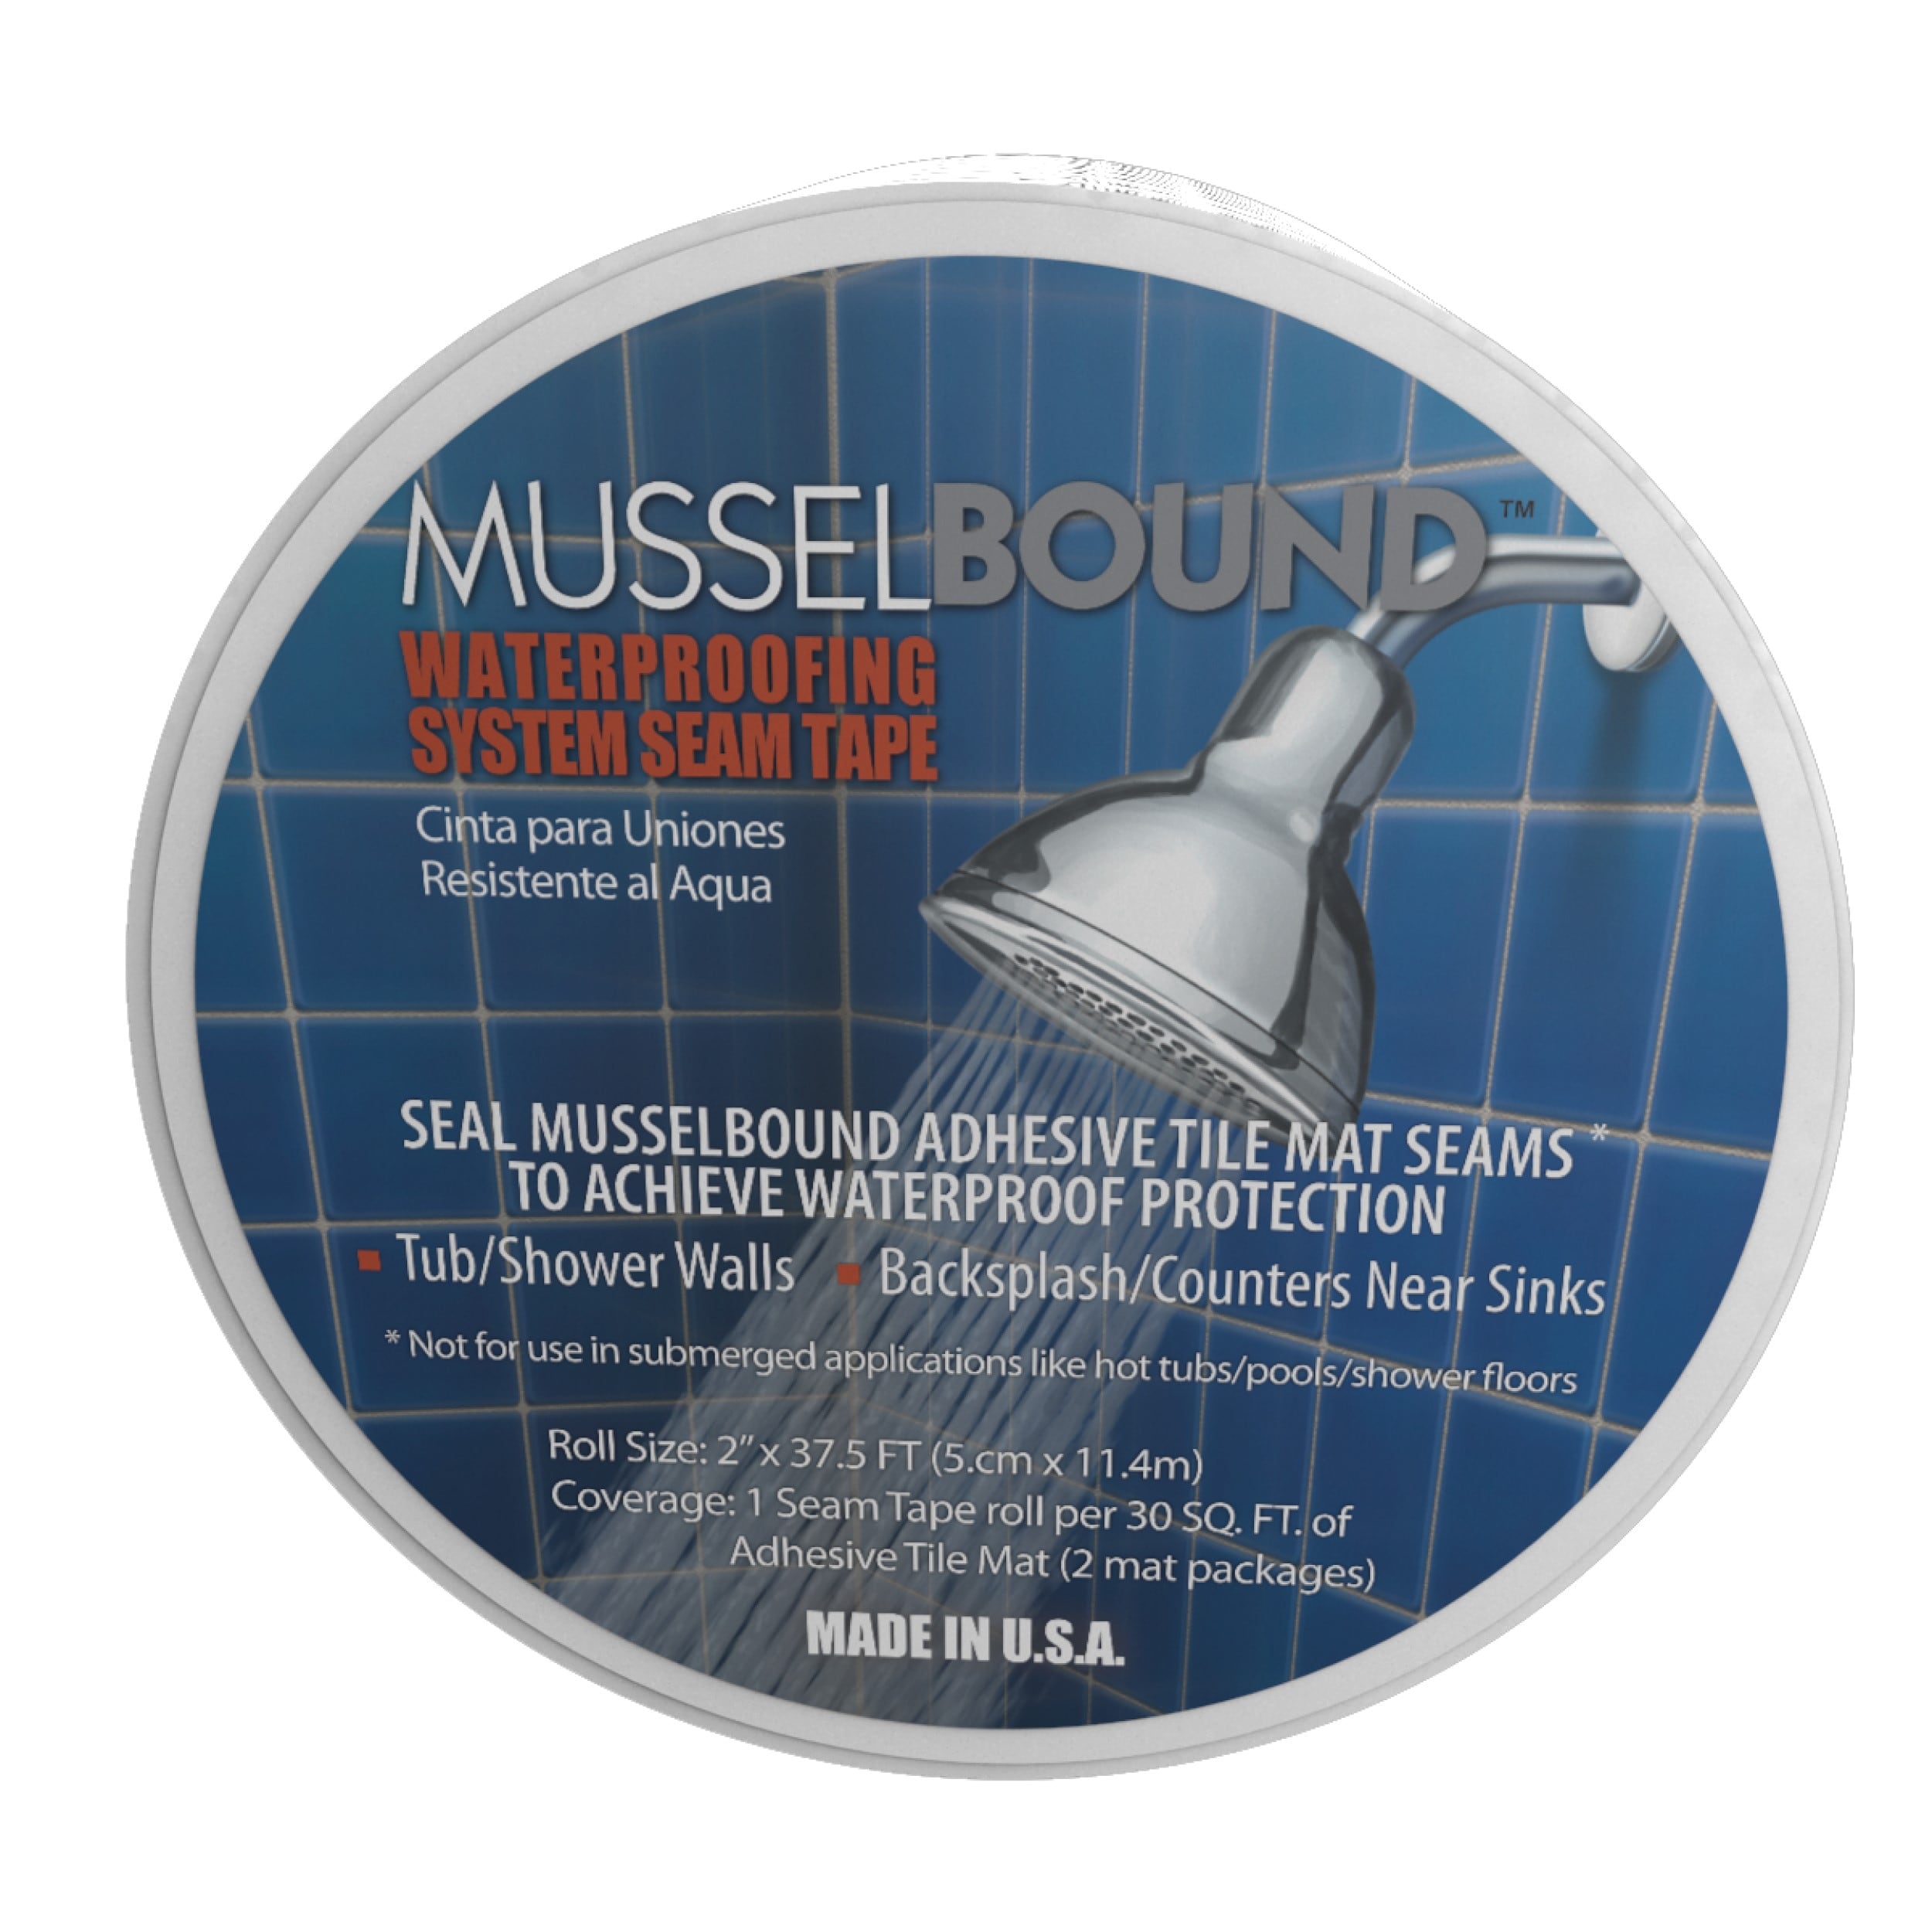 We - MusselBound Adhesive Tile Mat - double sided adhesive